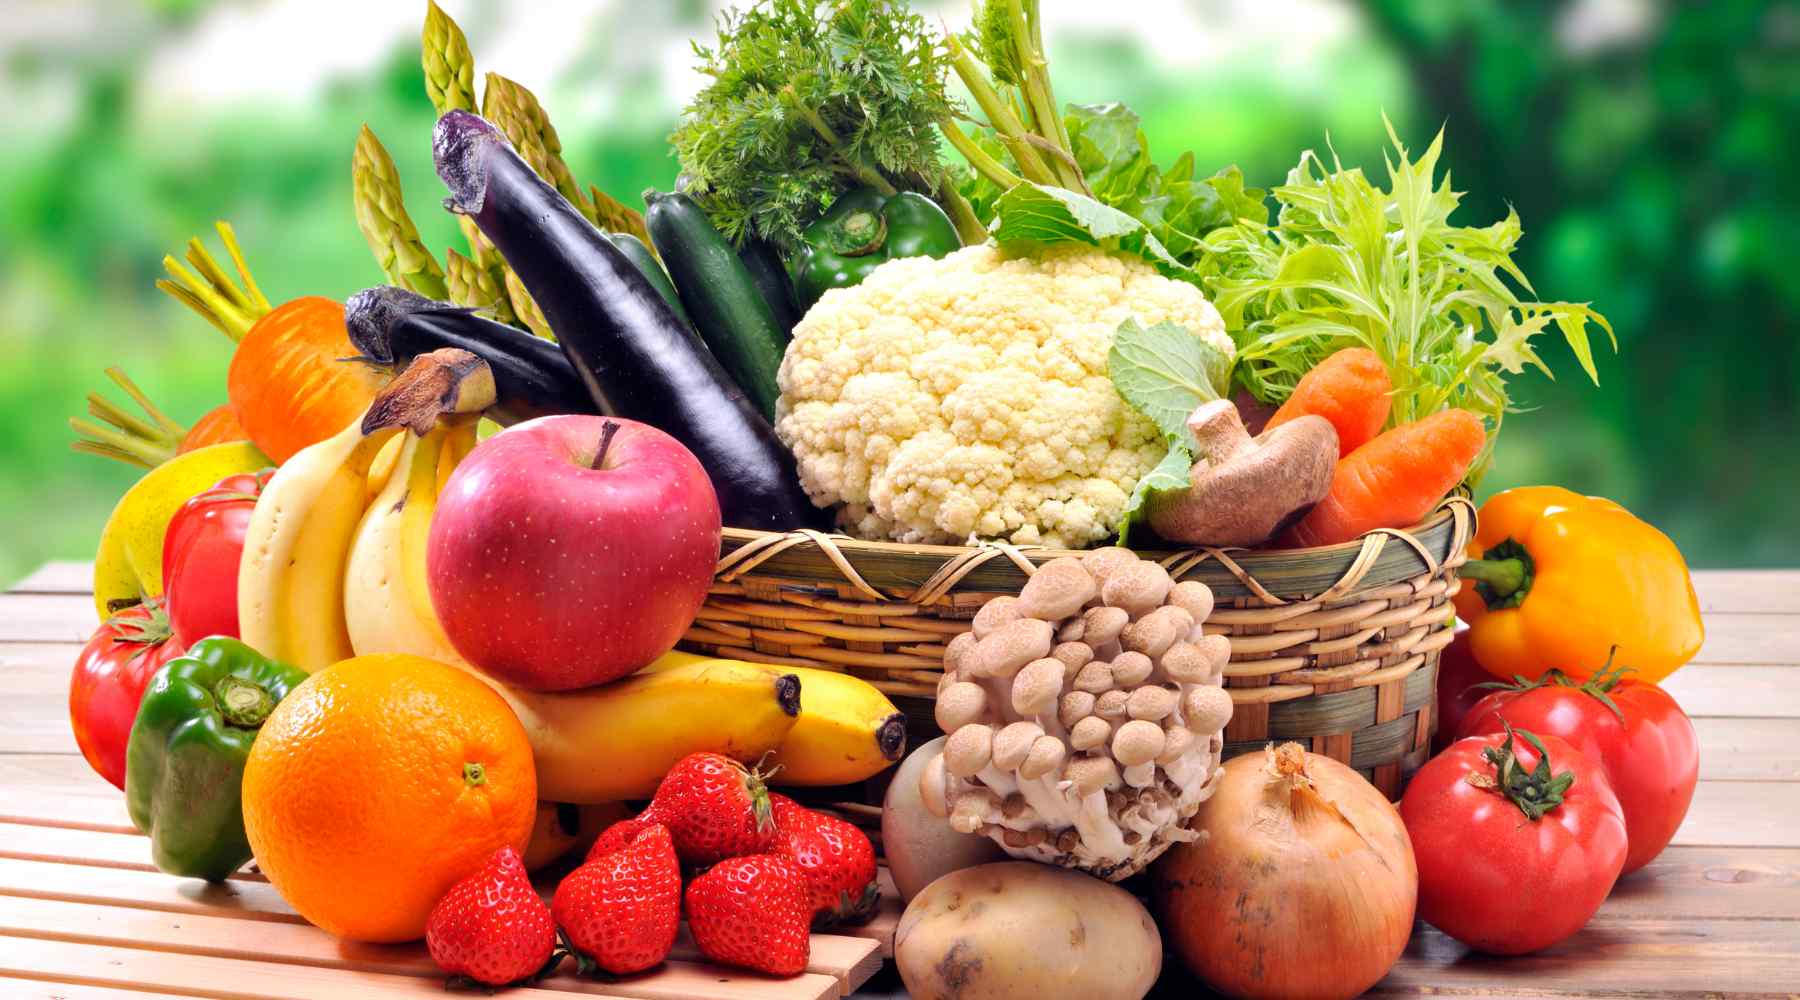 Winter Fruits & Vegetables To Keep You Healthy